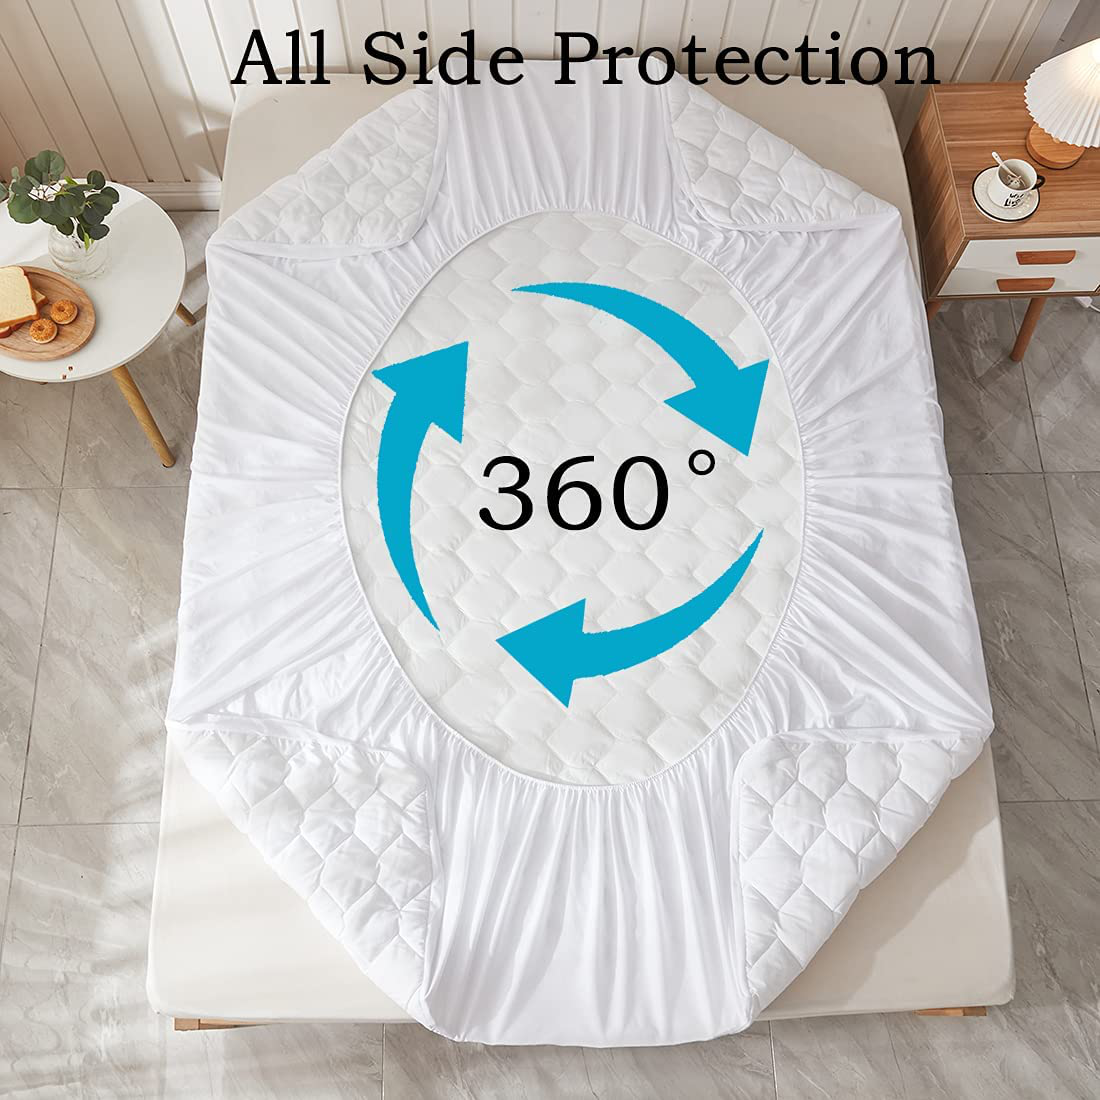 Bioeartha Waterproof Mattress Pad, California King Quilted Fitted Mattress Pad, 100% Waterproof Breathable Soft Mattress Protector Stretches up to 8-18 inches, Cooling Mattress Topper